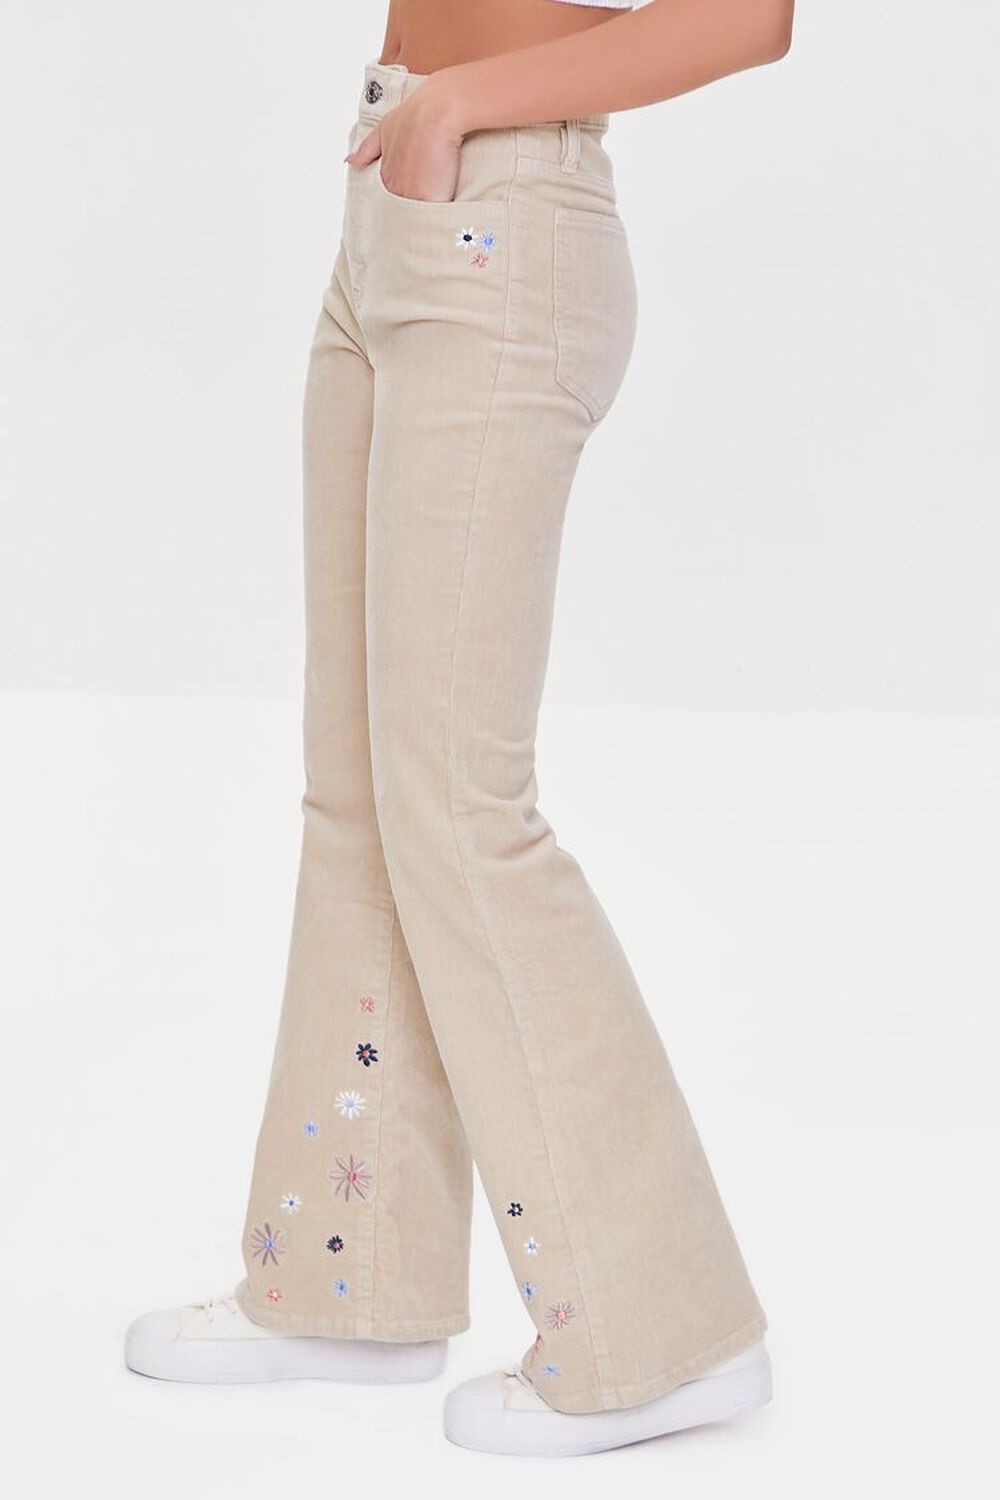 BEIGE/MULTI Embroidered Floral Corduroy Pants, image 3